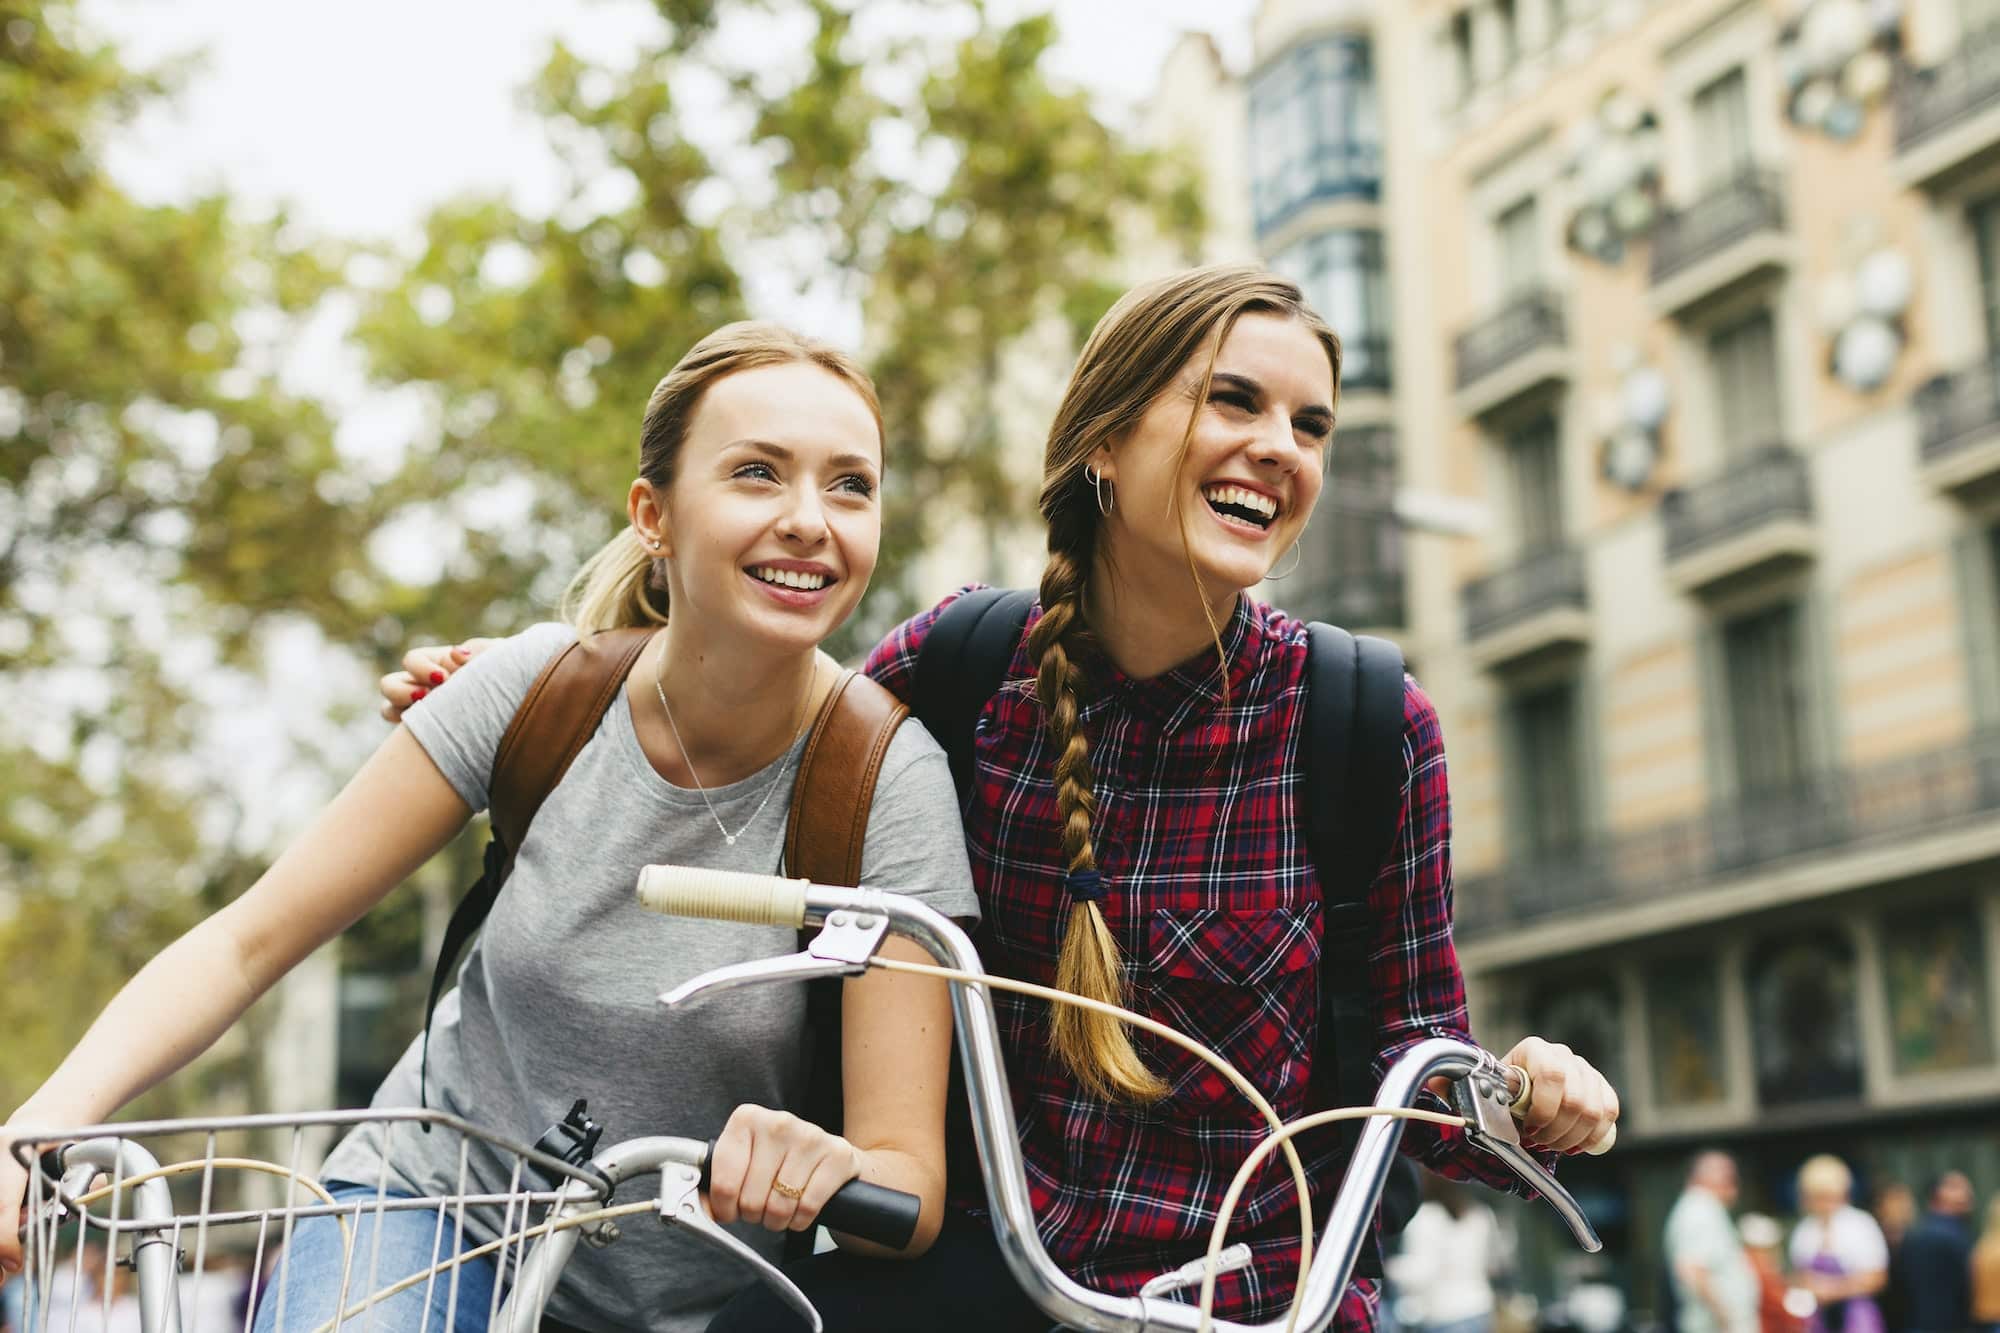 Spain, Barcelona, two young women on bicycles in the city